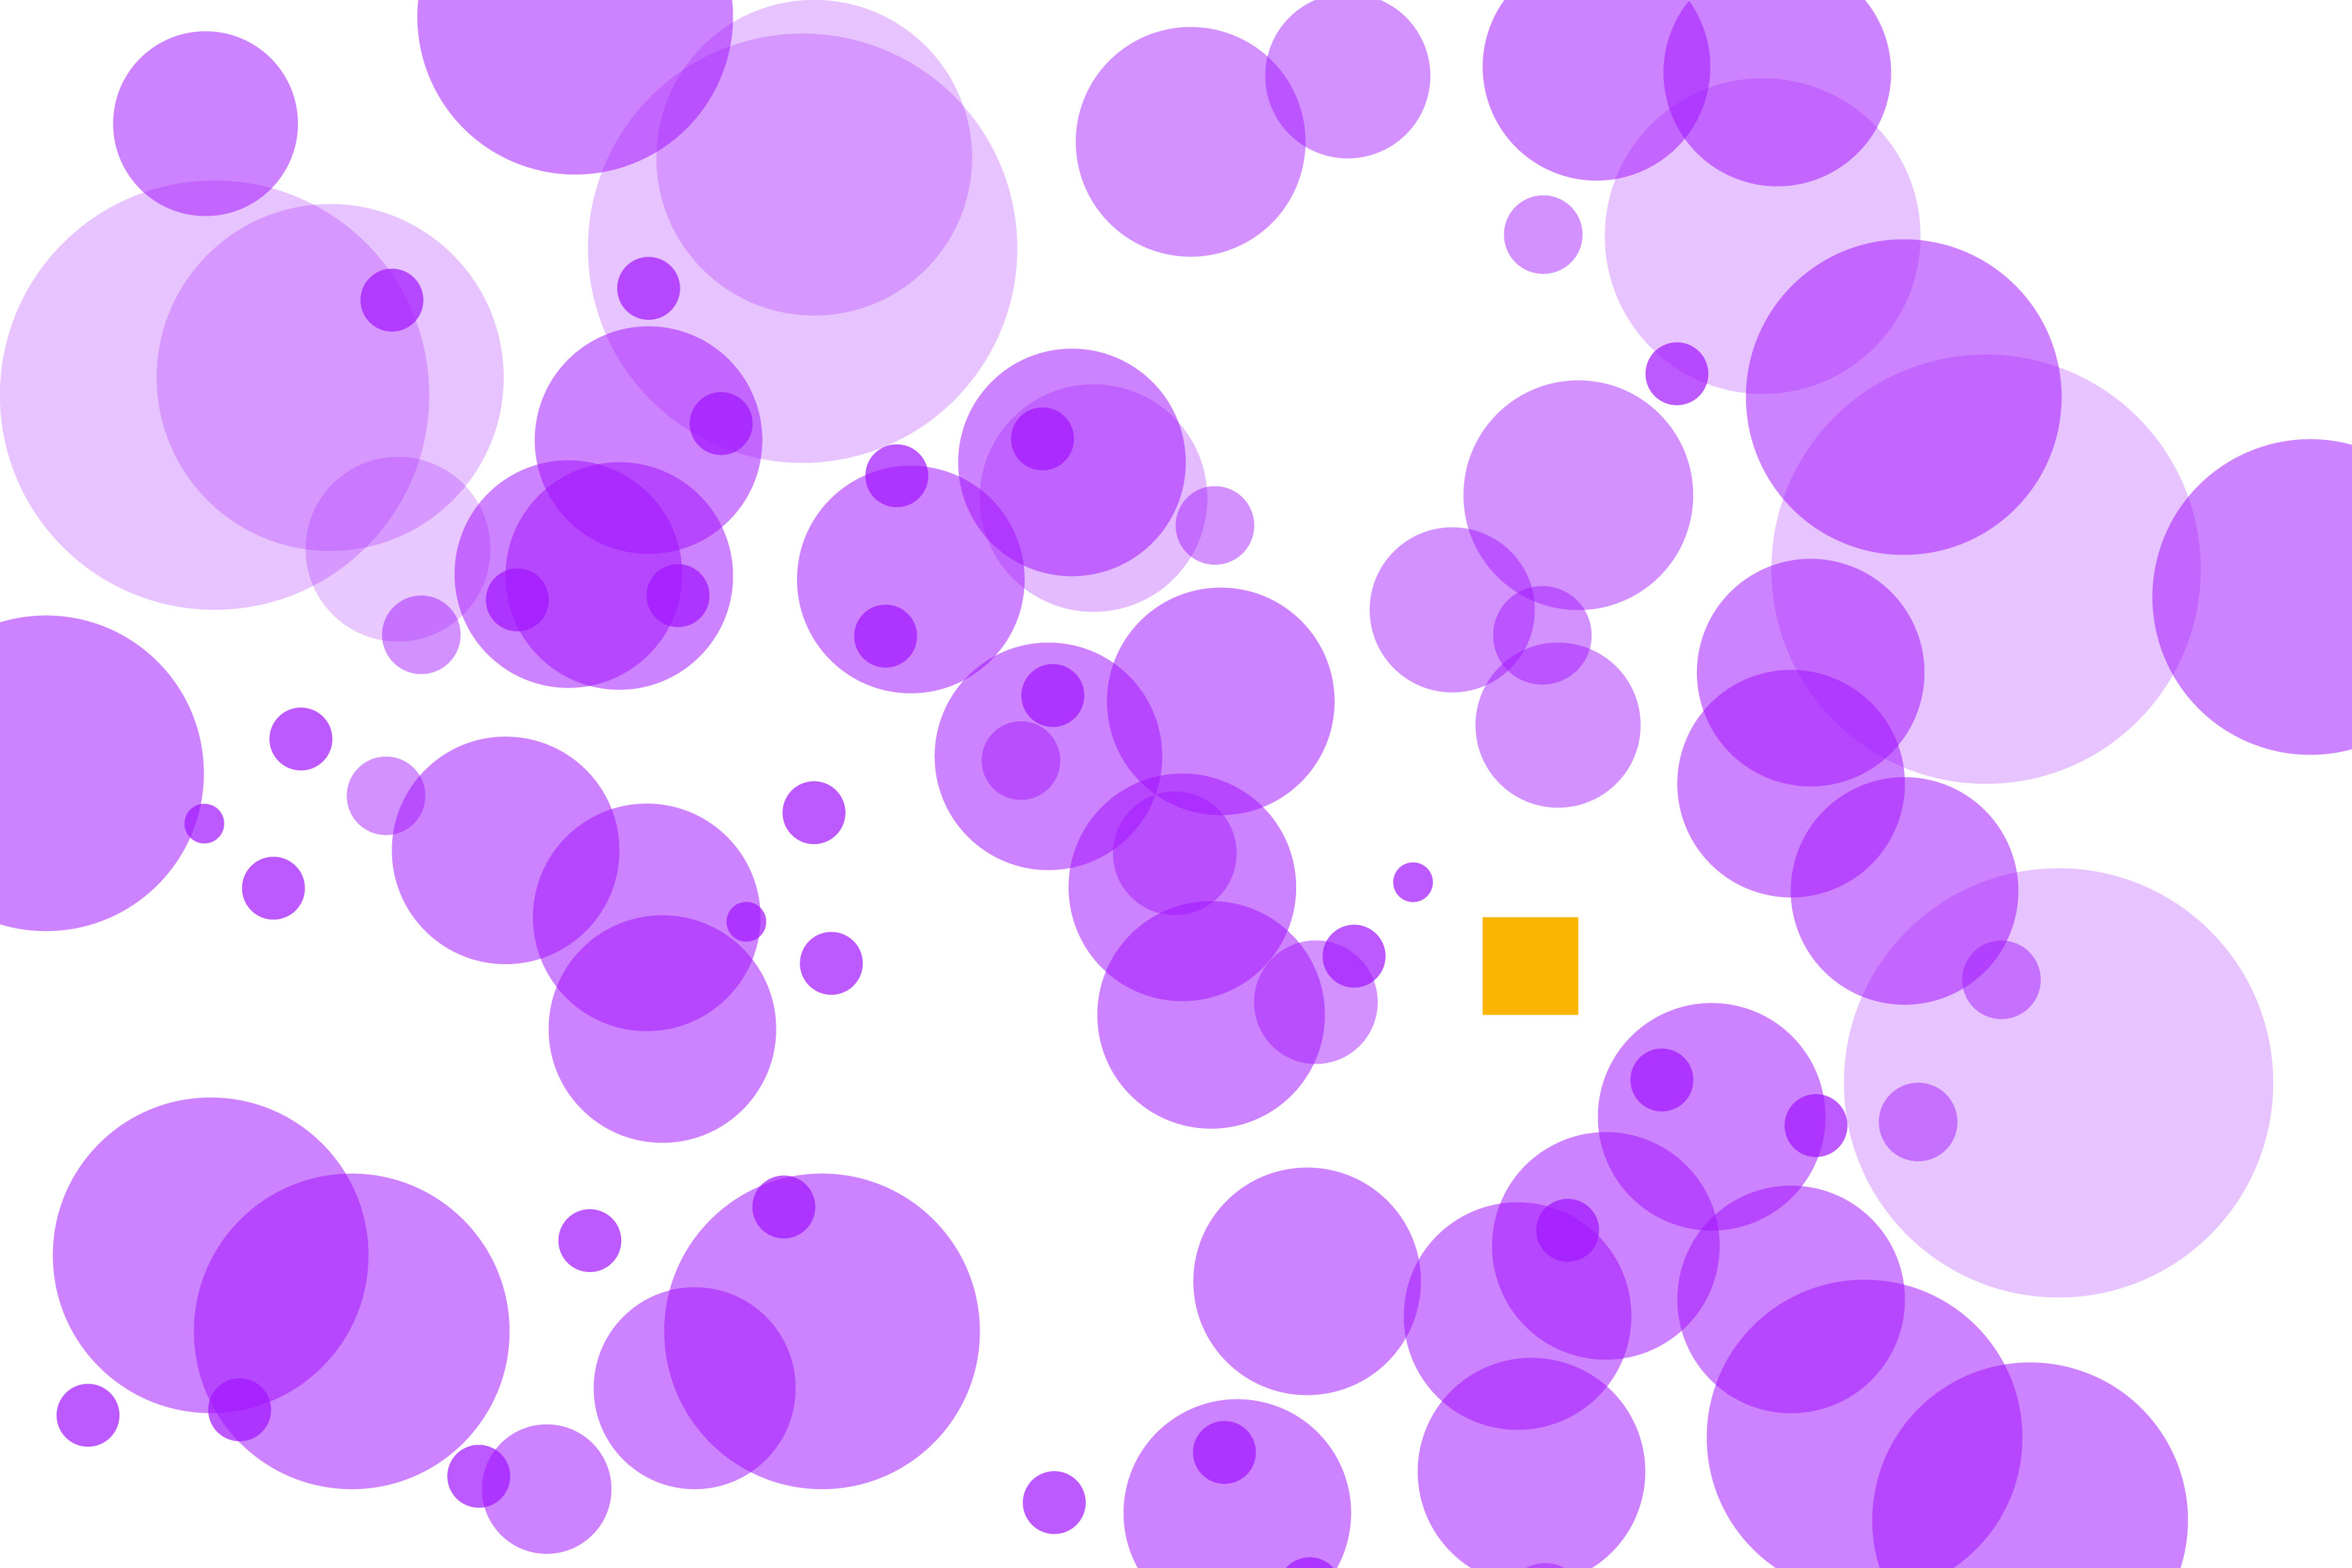 An abstract image showing purple overlapping circles and one yellow square center-right.